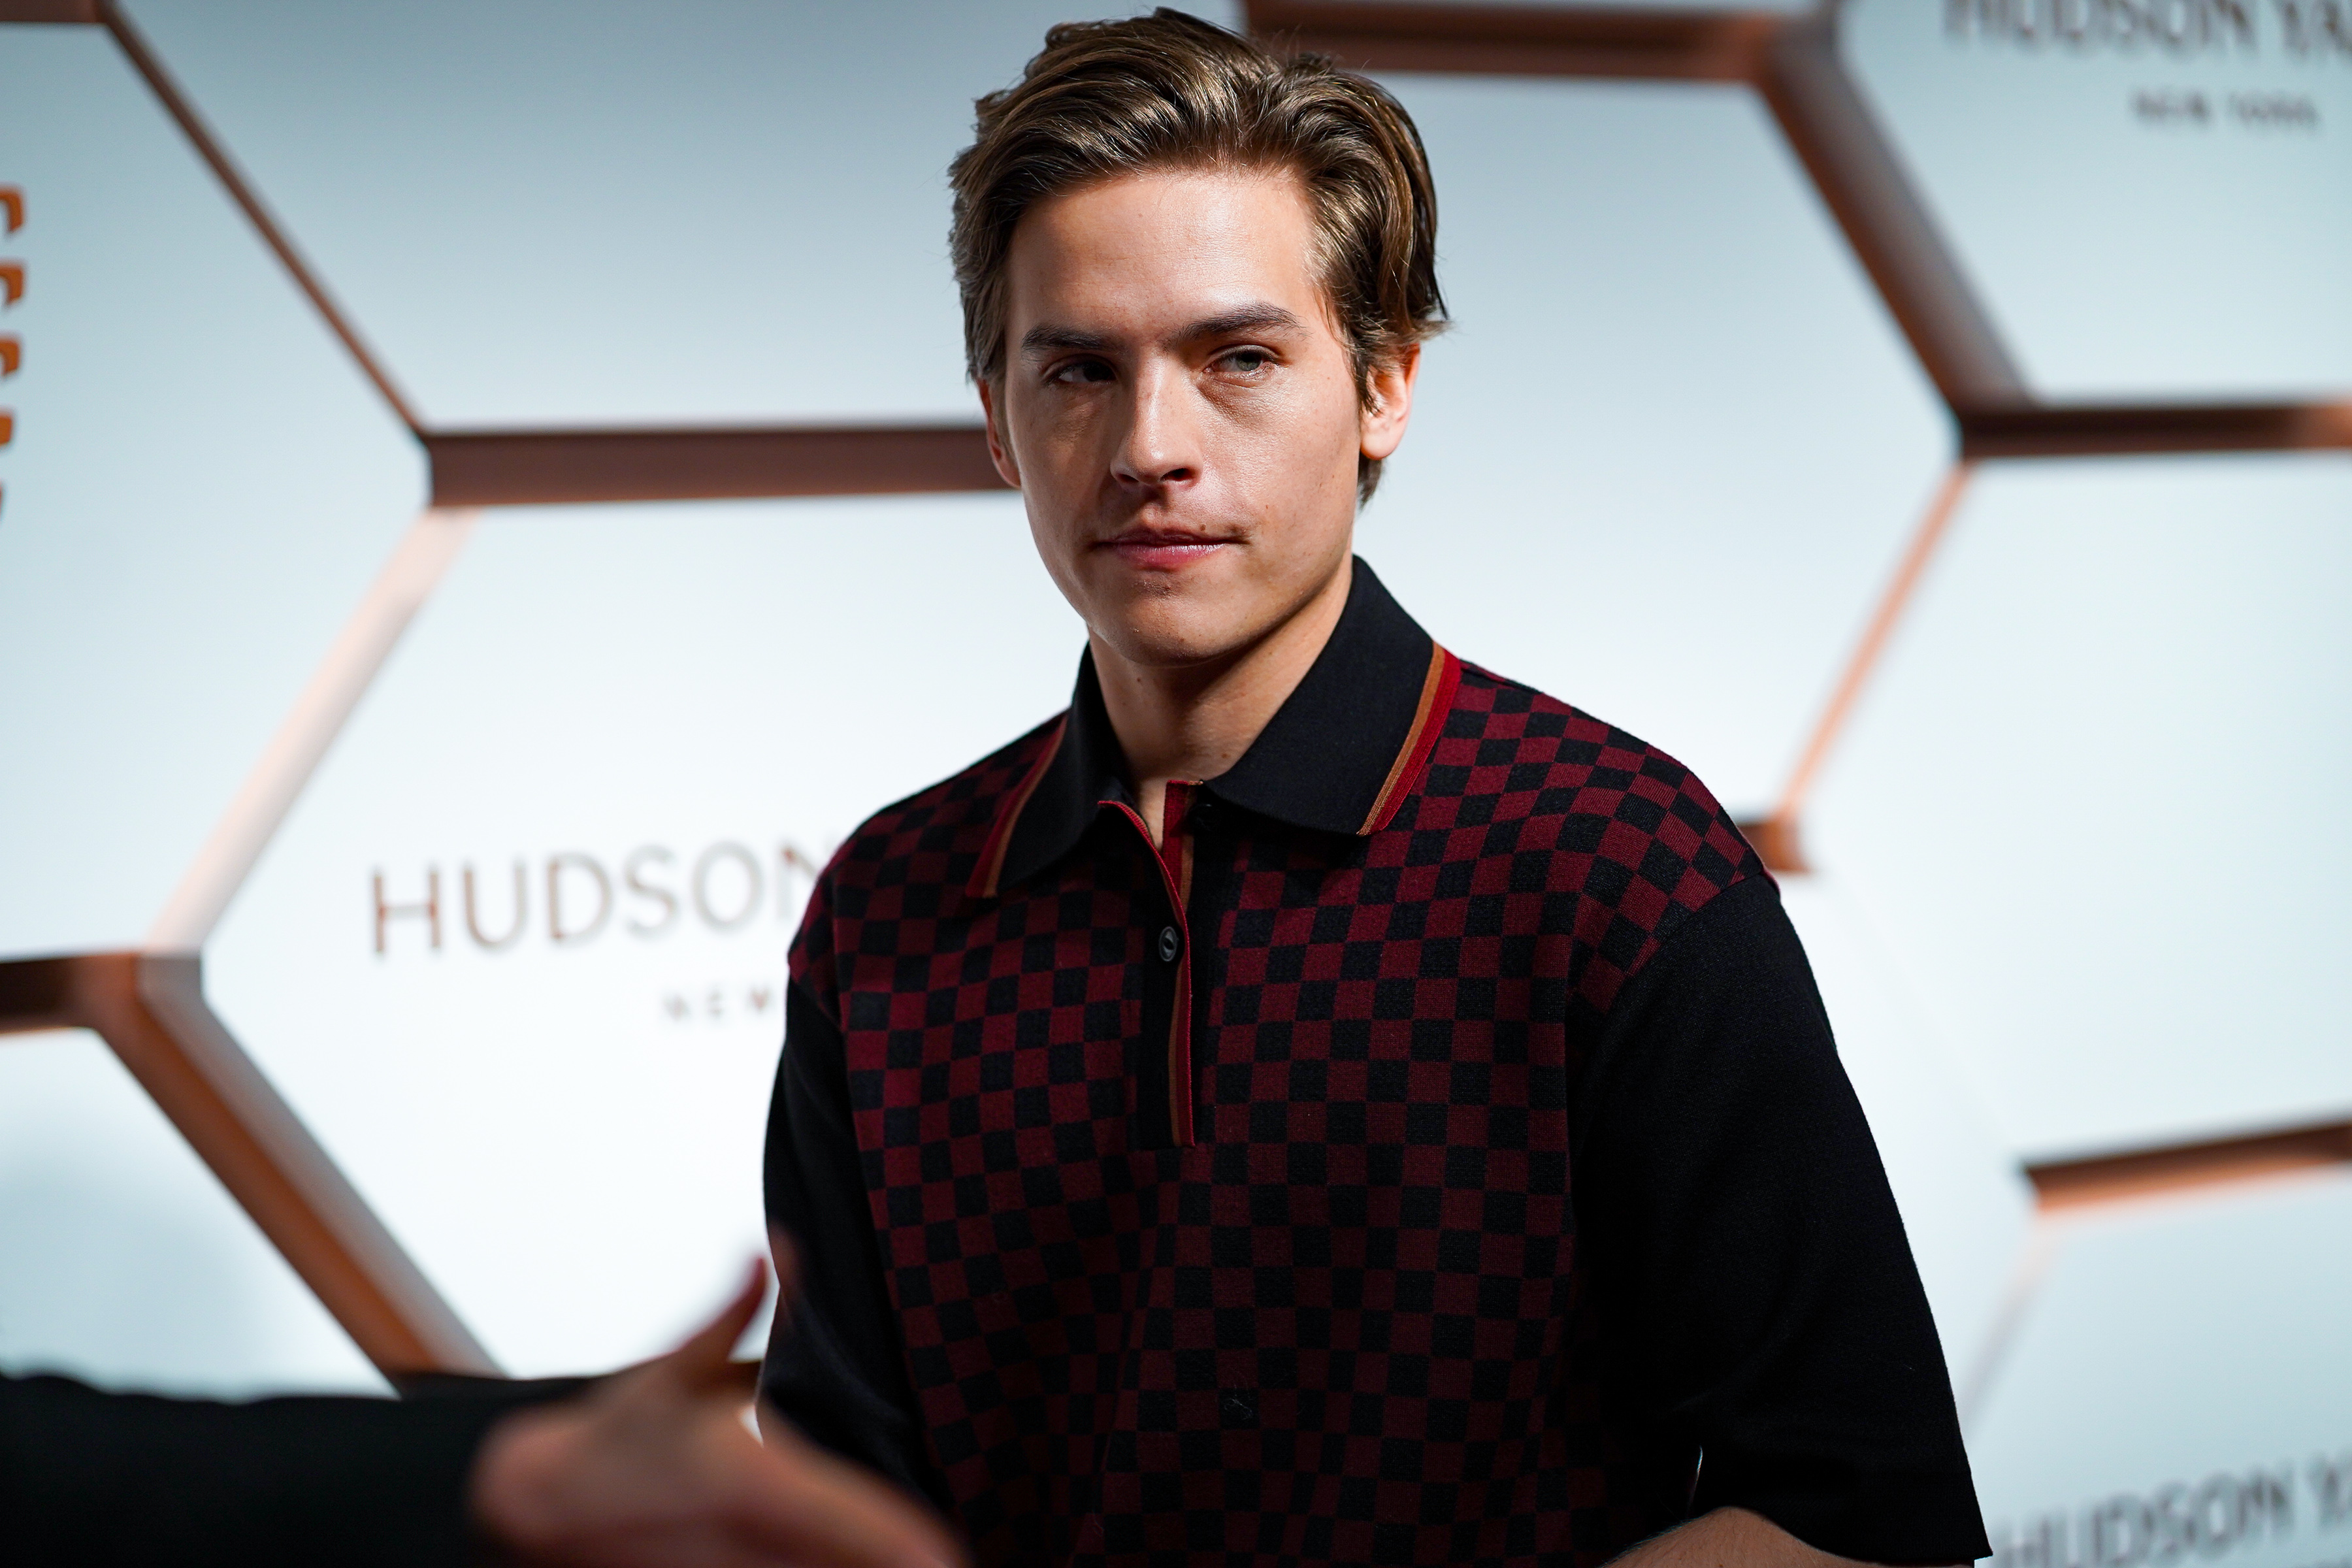 Dylan Sprouse is terrifying in trailer for new movie 'Dismissed